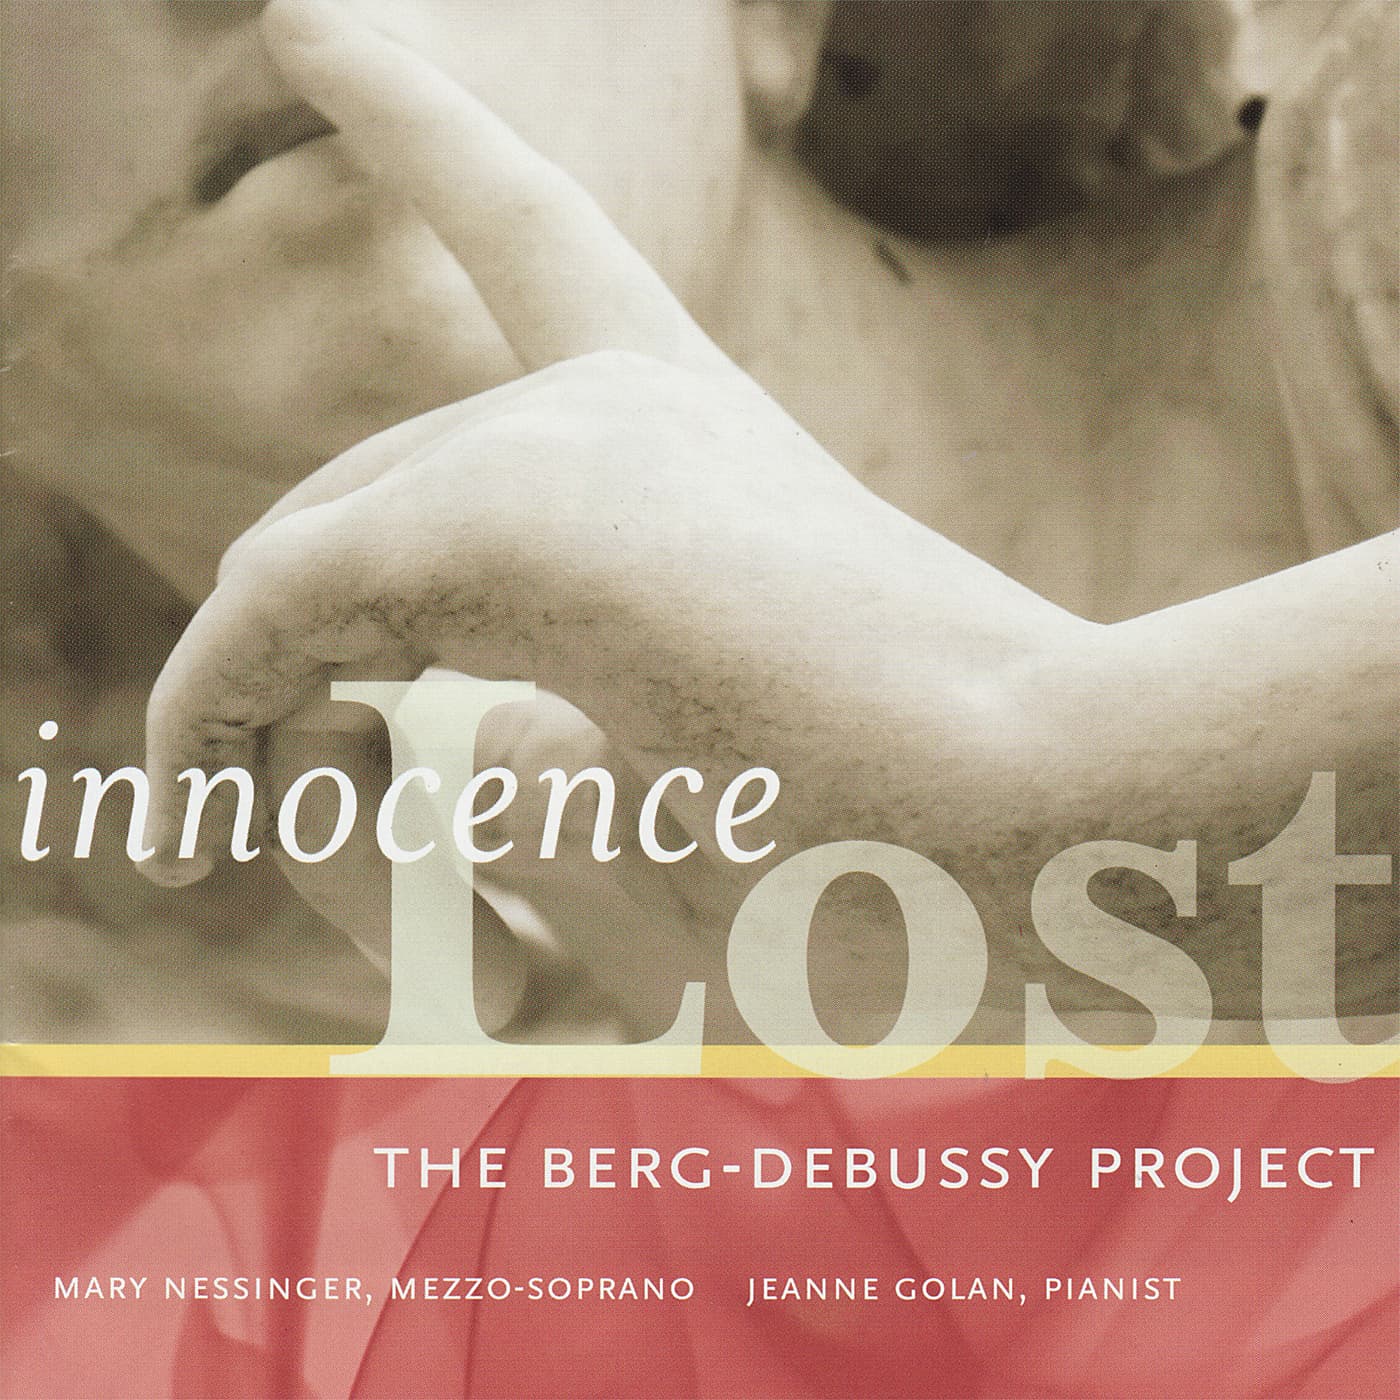 Cover art for Innocent Lost: The Berg-Debussy Project album